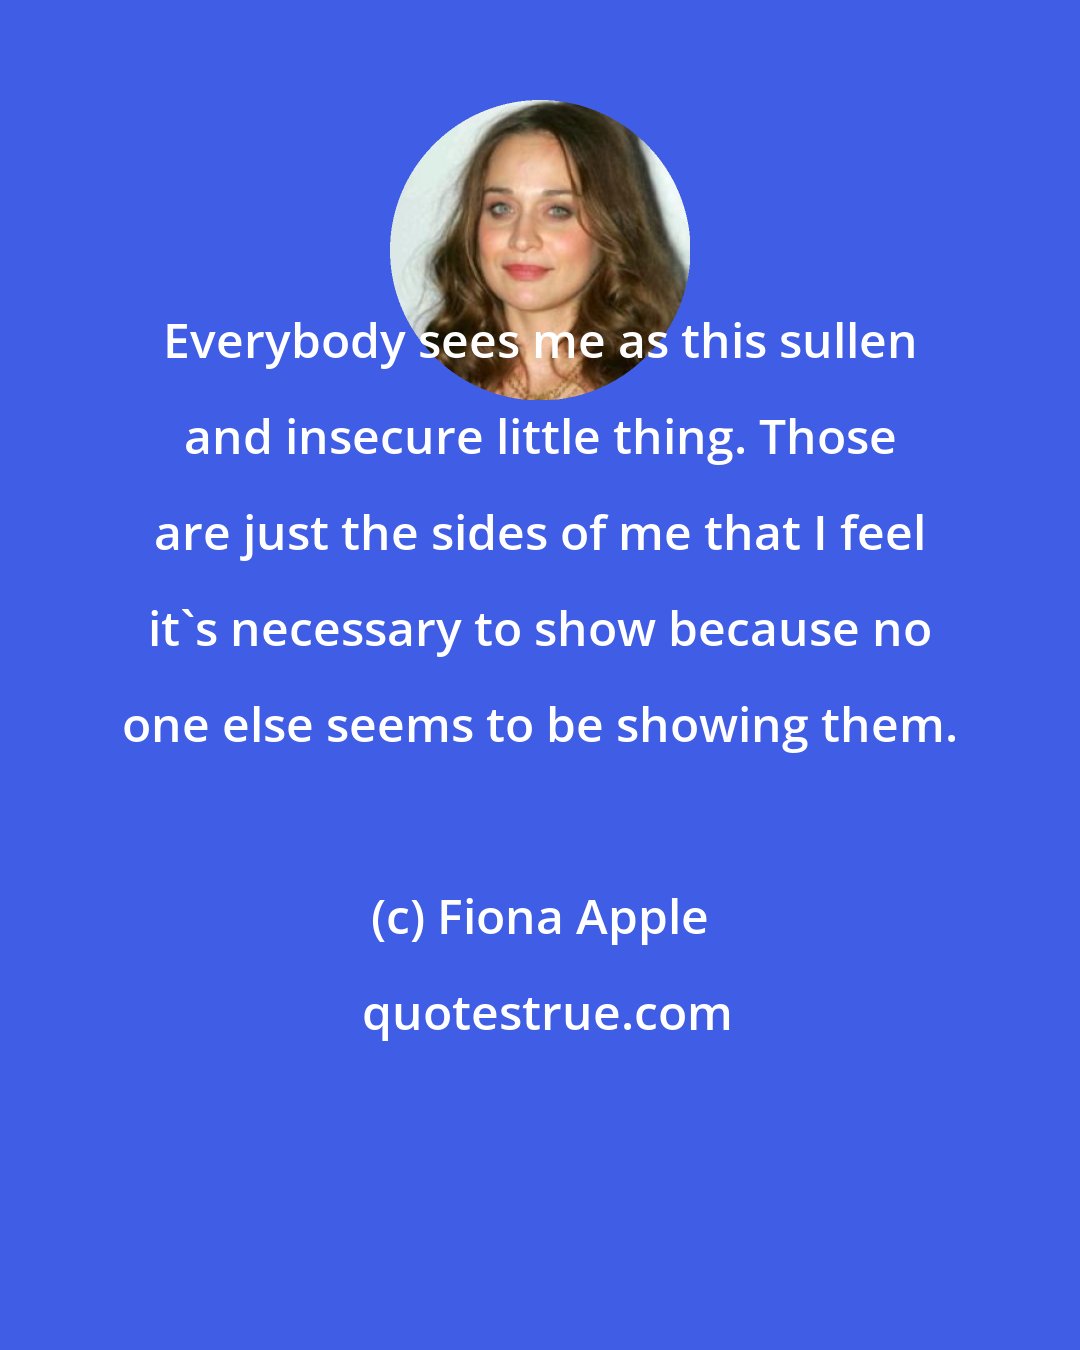 Fiona Apple: Everybody sees me as this sullen and insecure little thing. Those are just the sides of me that I feel it's necessary to show because no one else seems to be showing them.